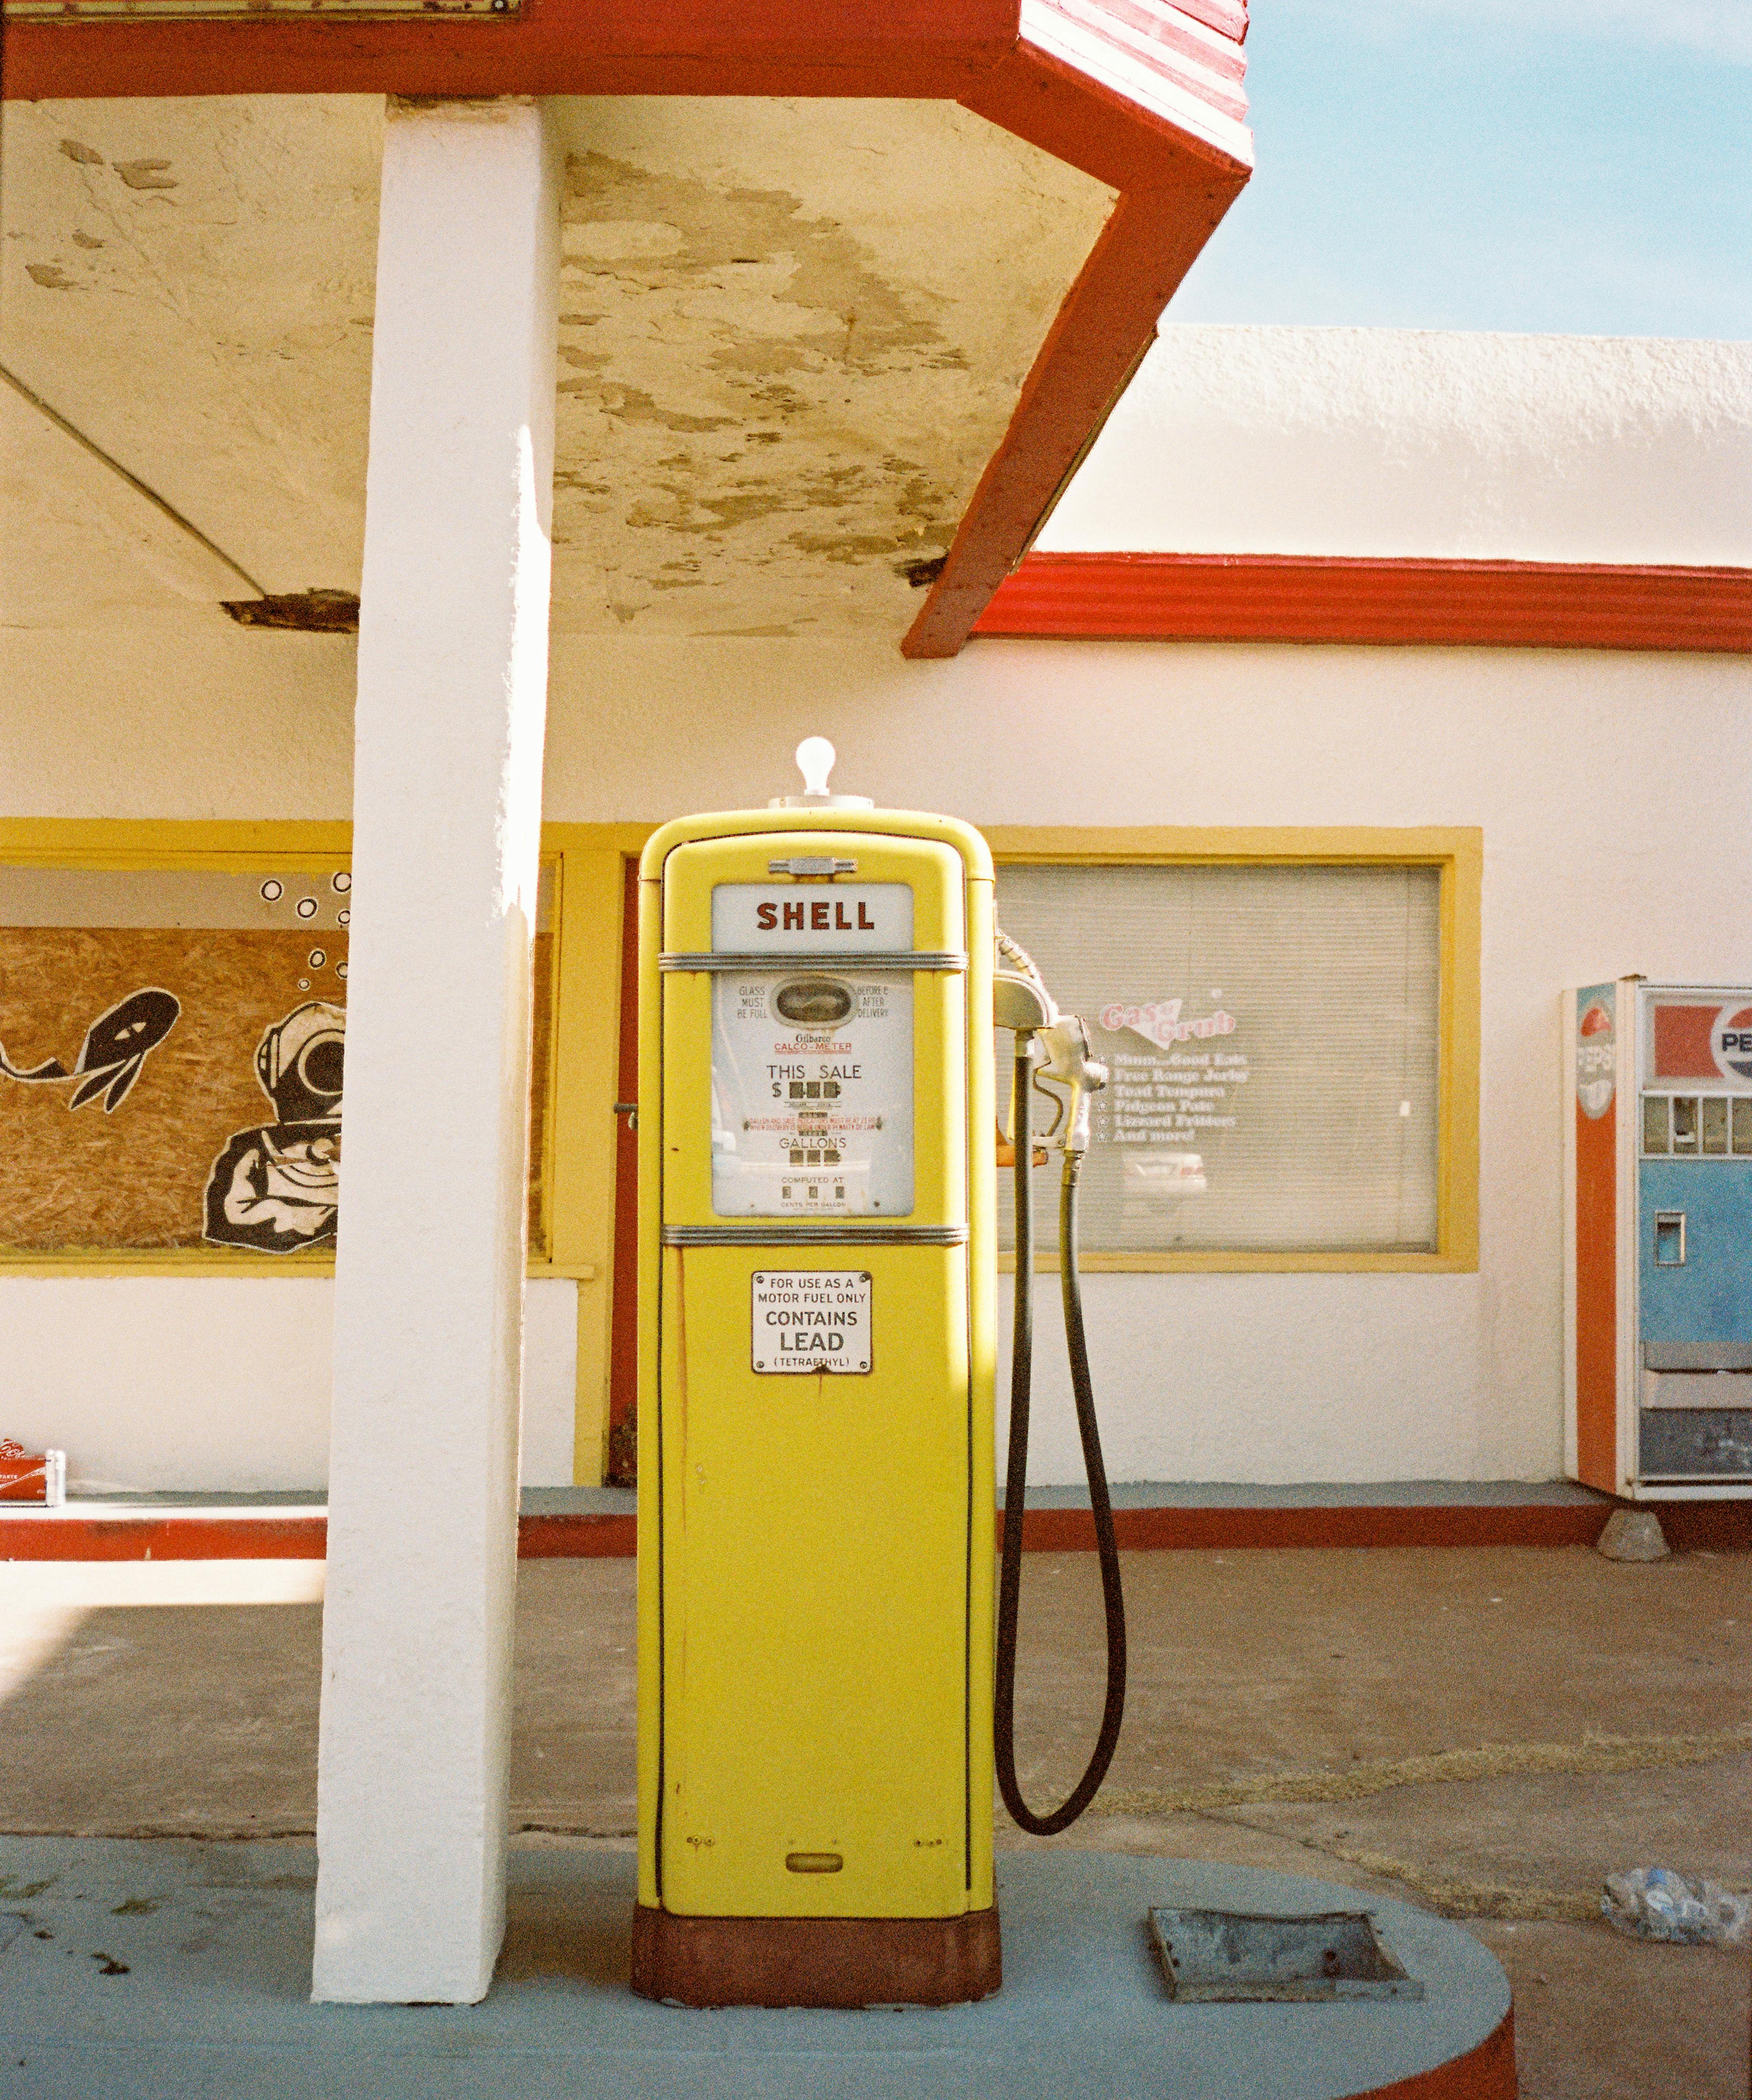 Bisbee gas station on film by photographer, Natalie Carrasco for Moment.